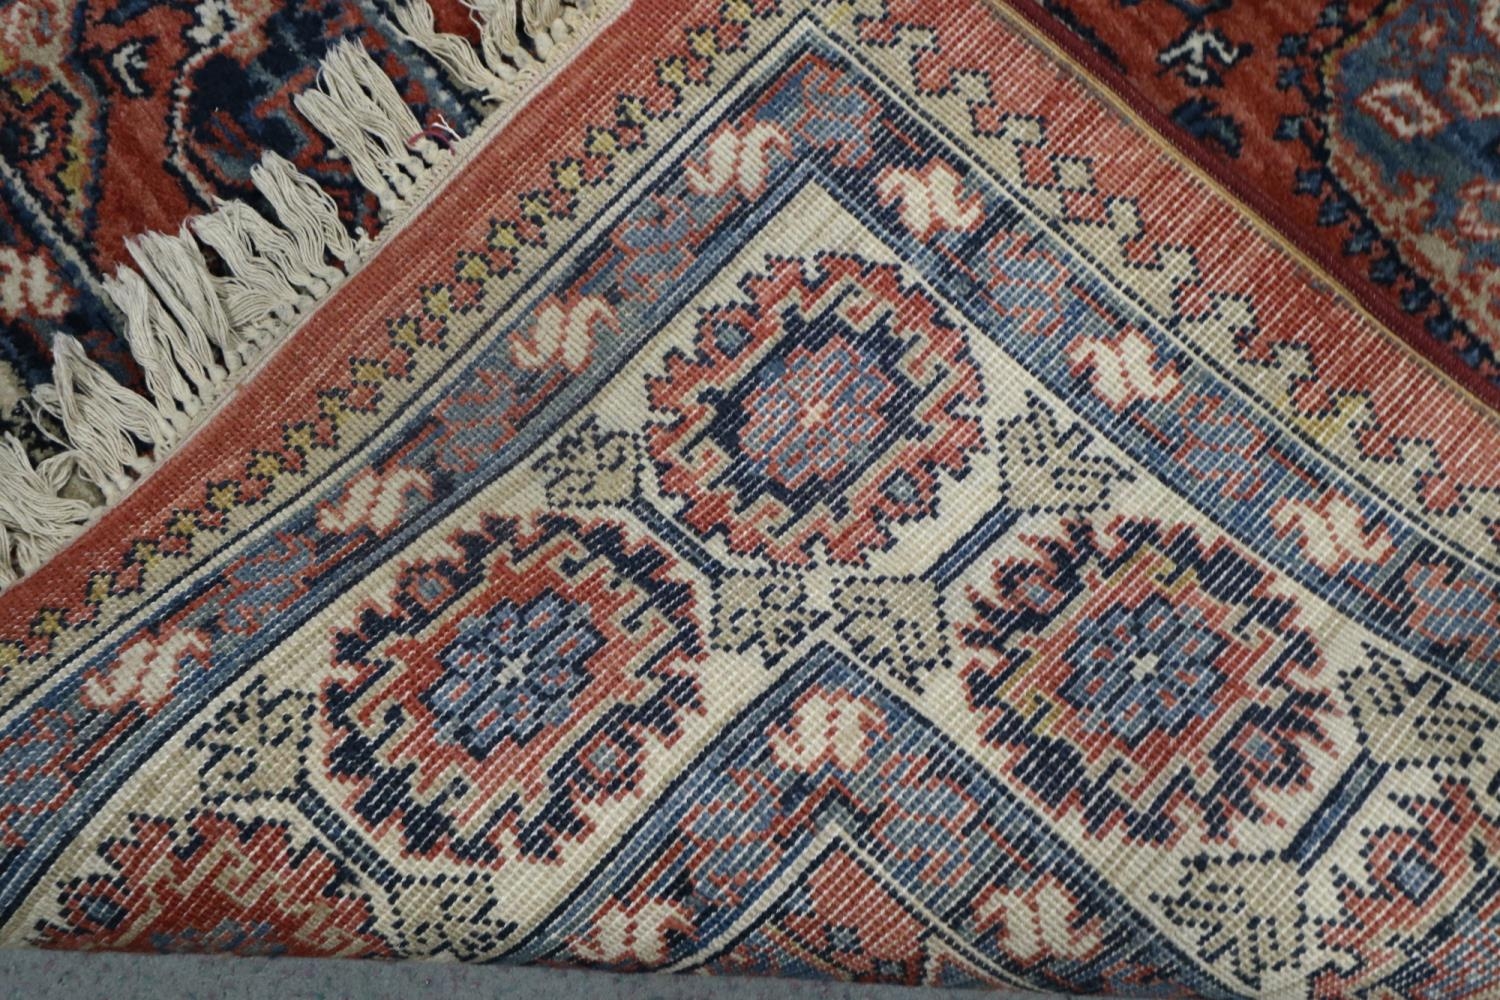 A Louis de Poortere rug of traditional Persian design with geometric design, 54 1/2" x 77" approx - Image 3 of 3